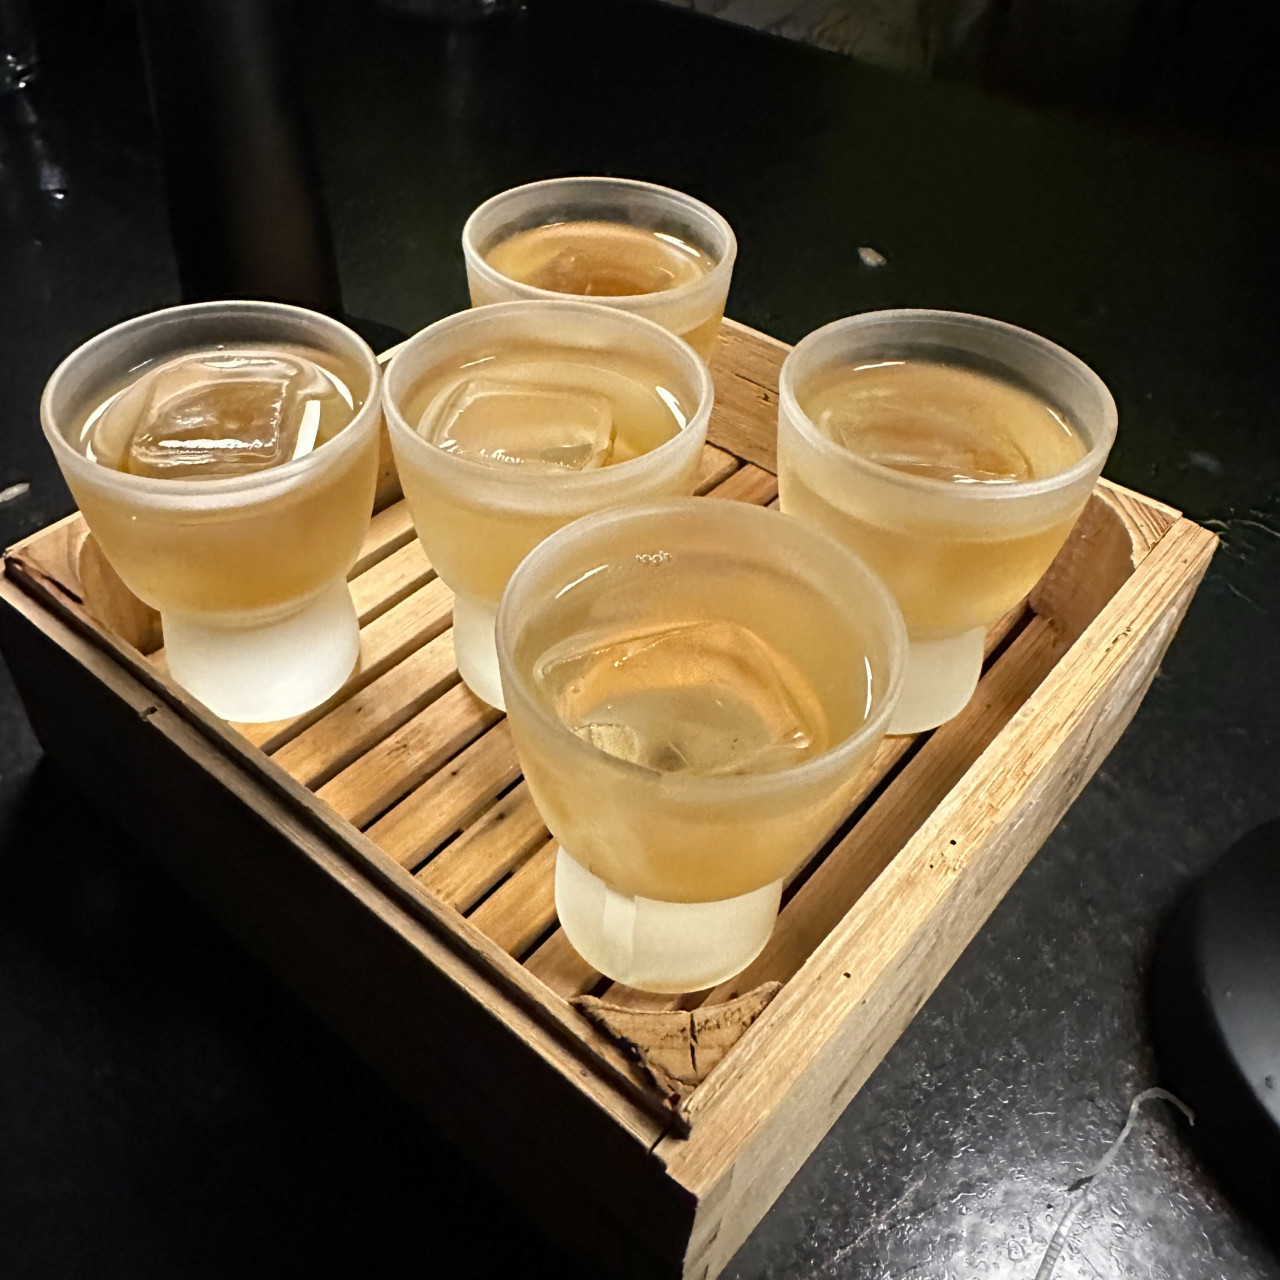 Shhhbuuuleee is a very sake-forward establishment, though of course a selection of wines and cocktails and highballs are also served. – Haikal Fernandez pic